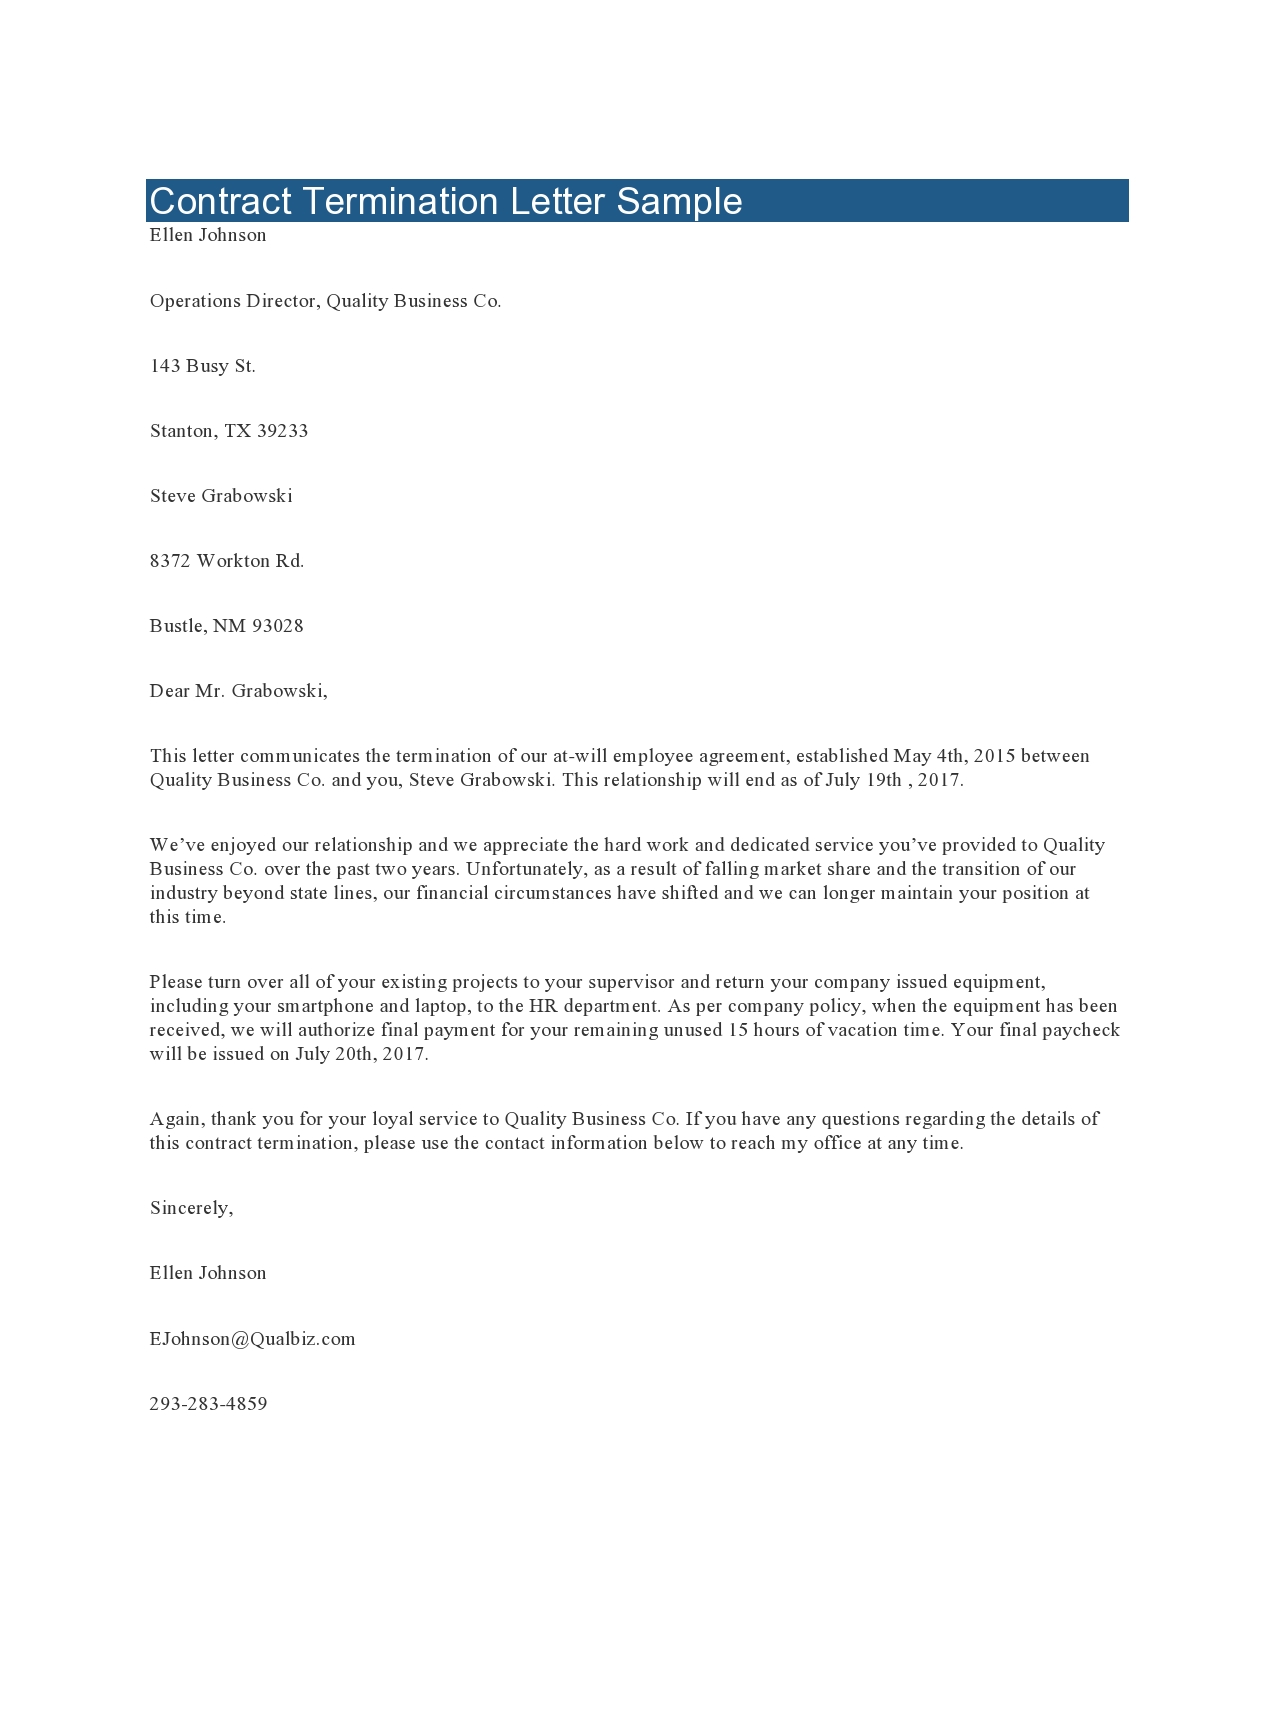 Free contract termination letter 35